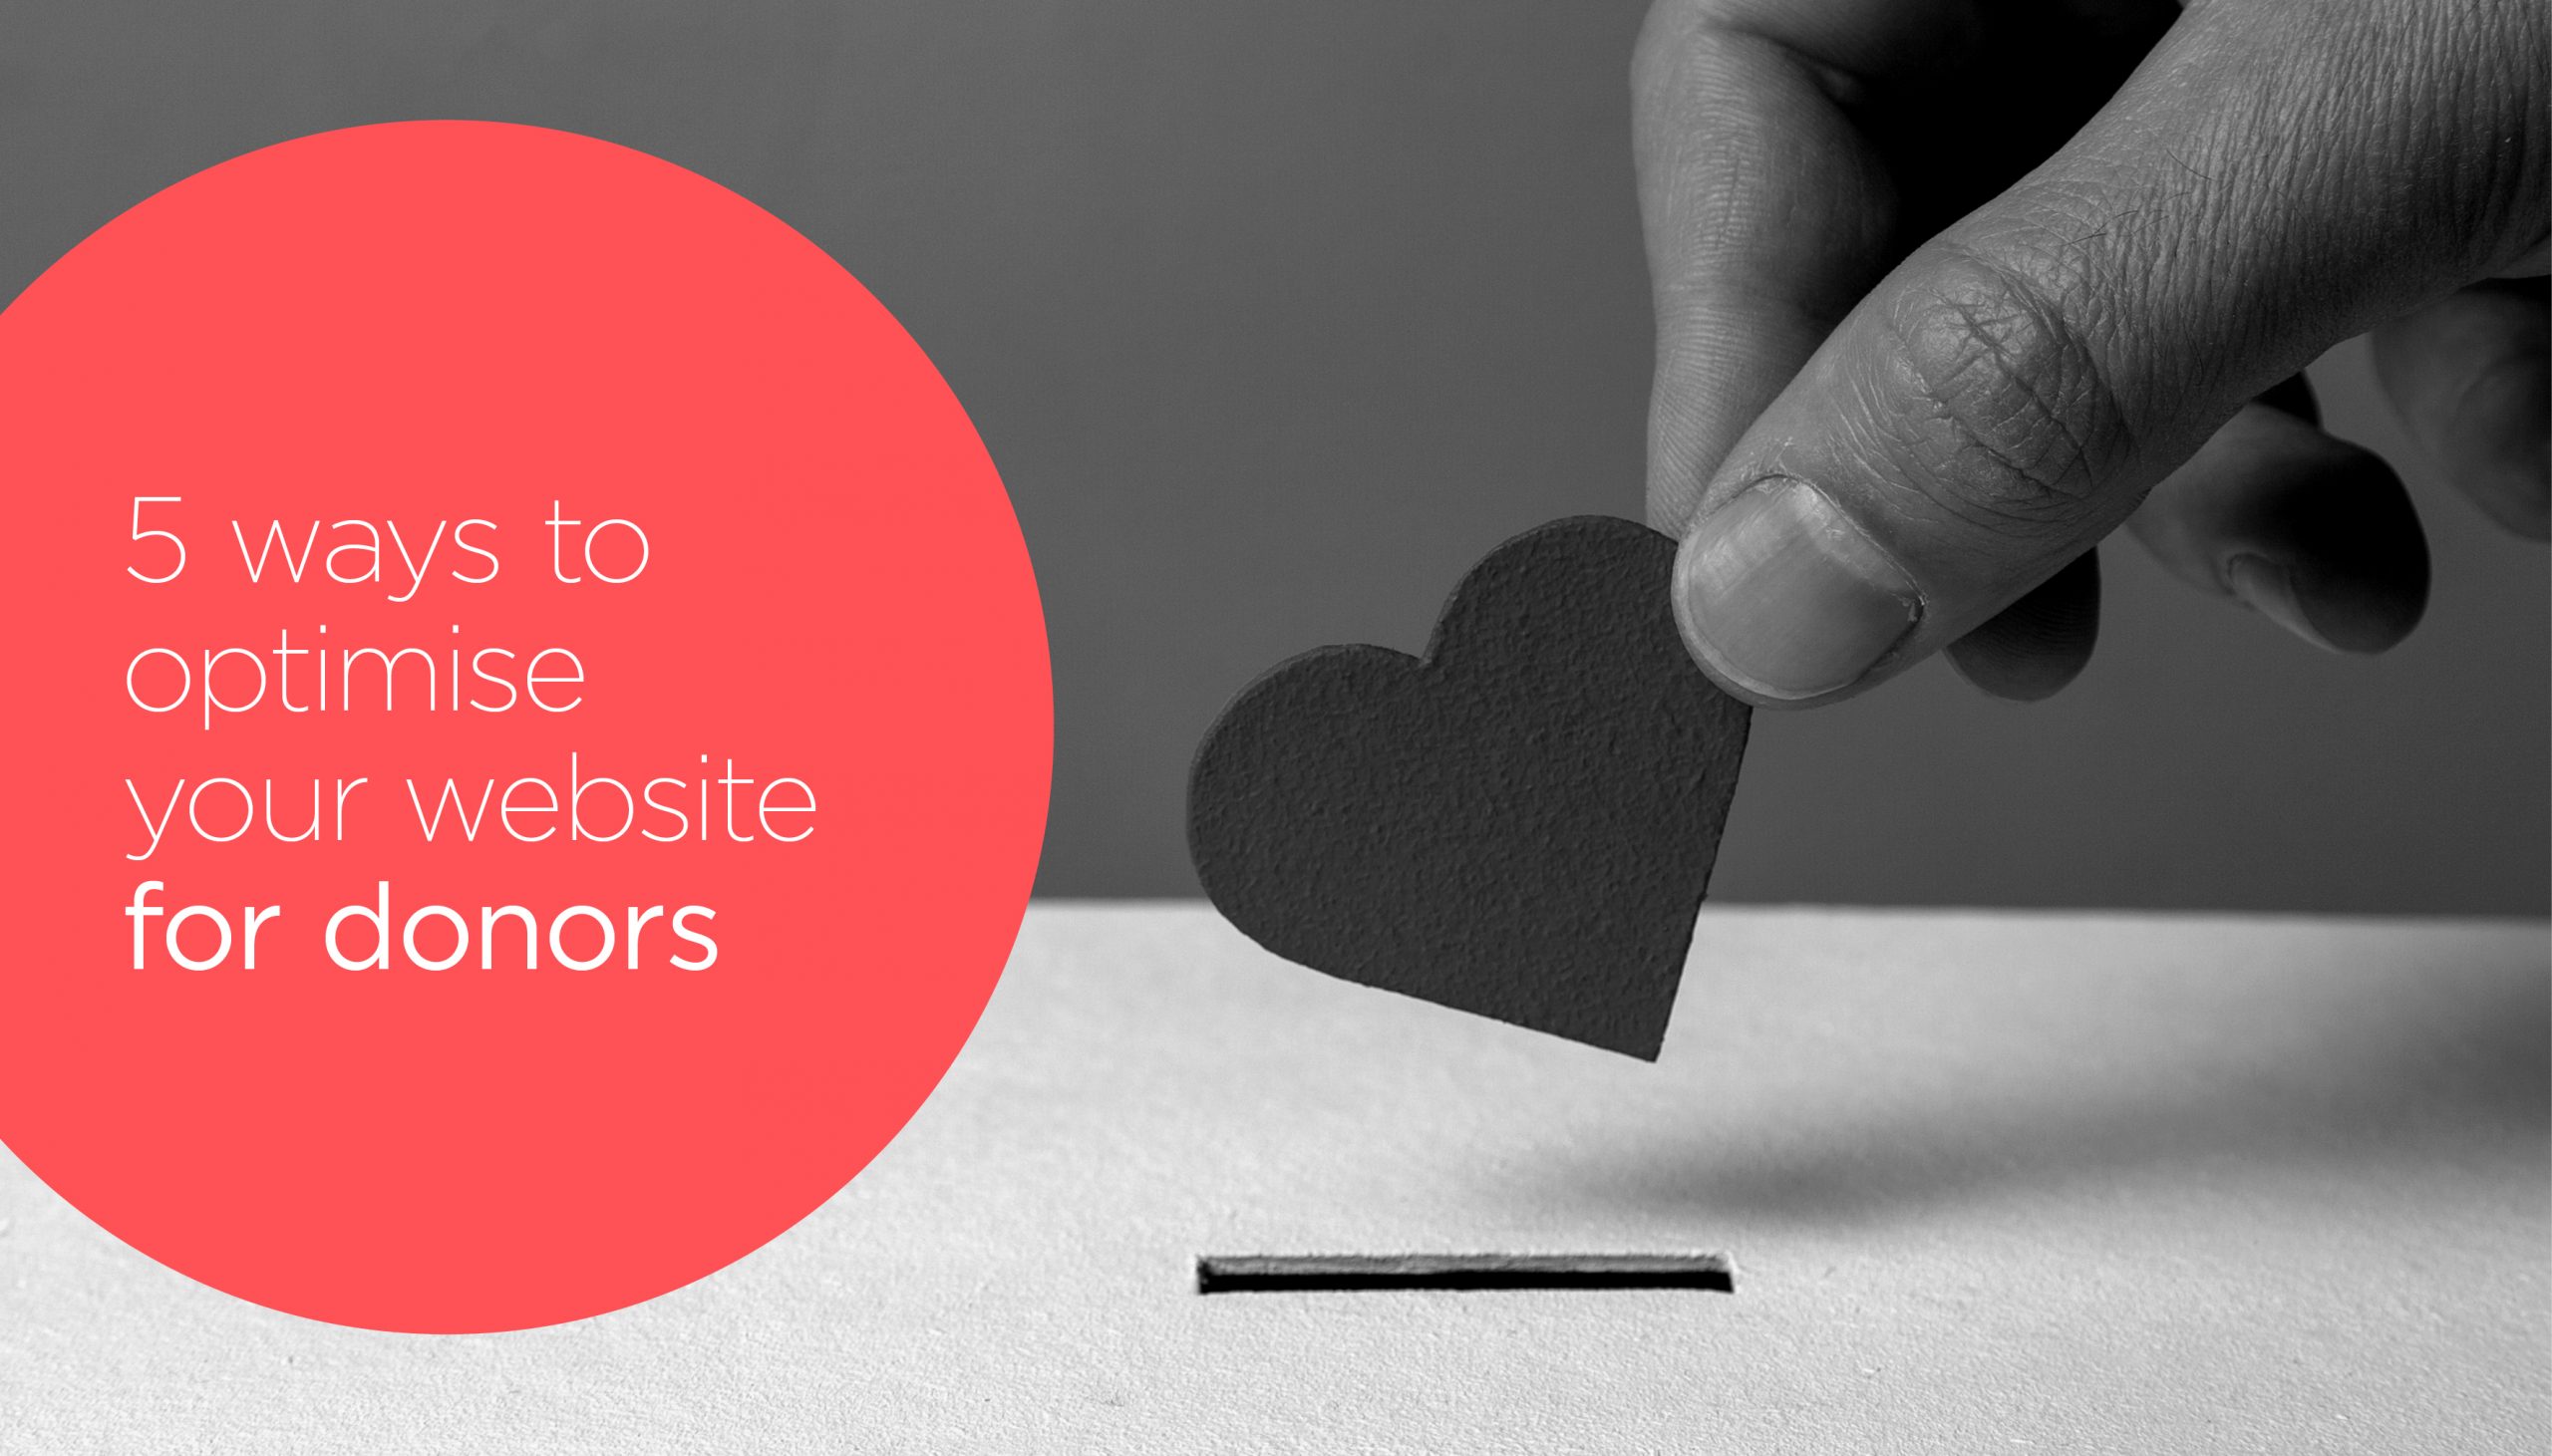 5 Ways to Optimise your Website for Donors